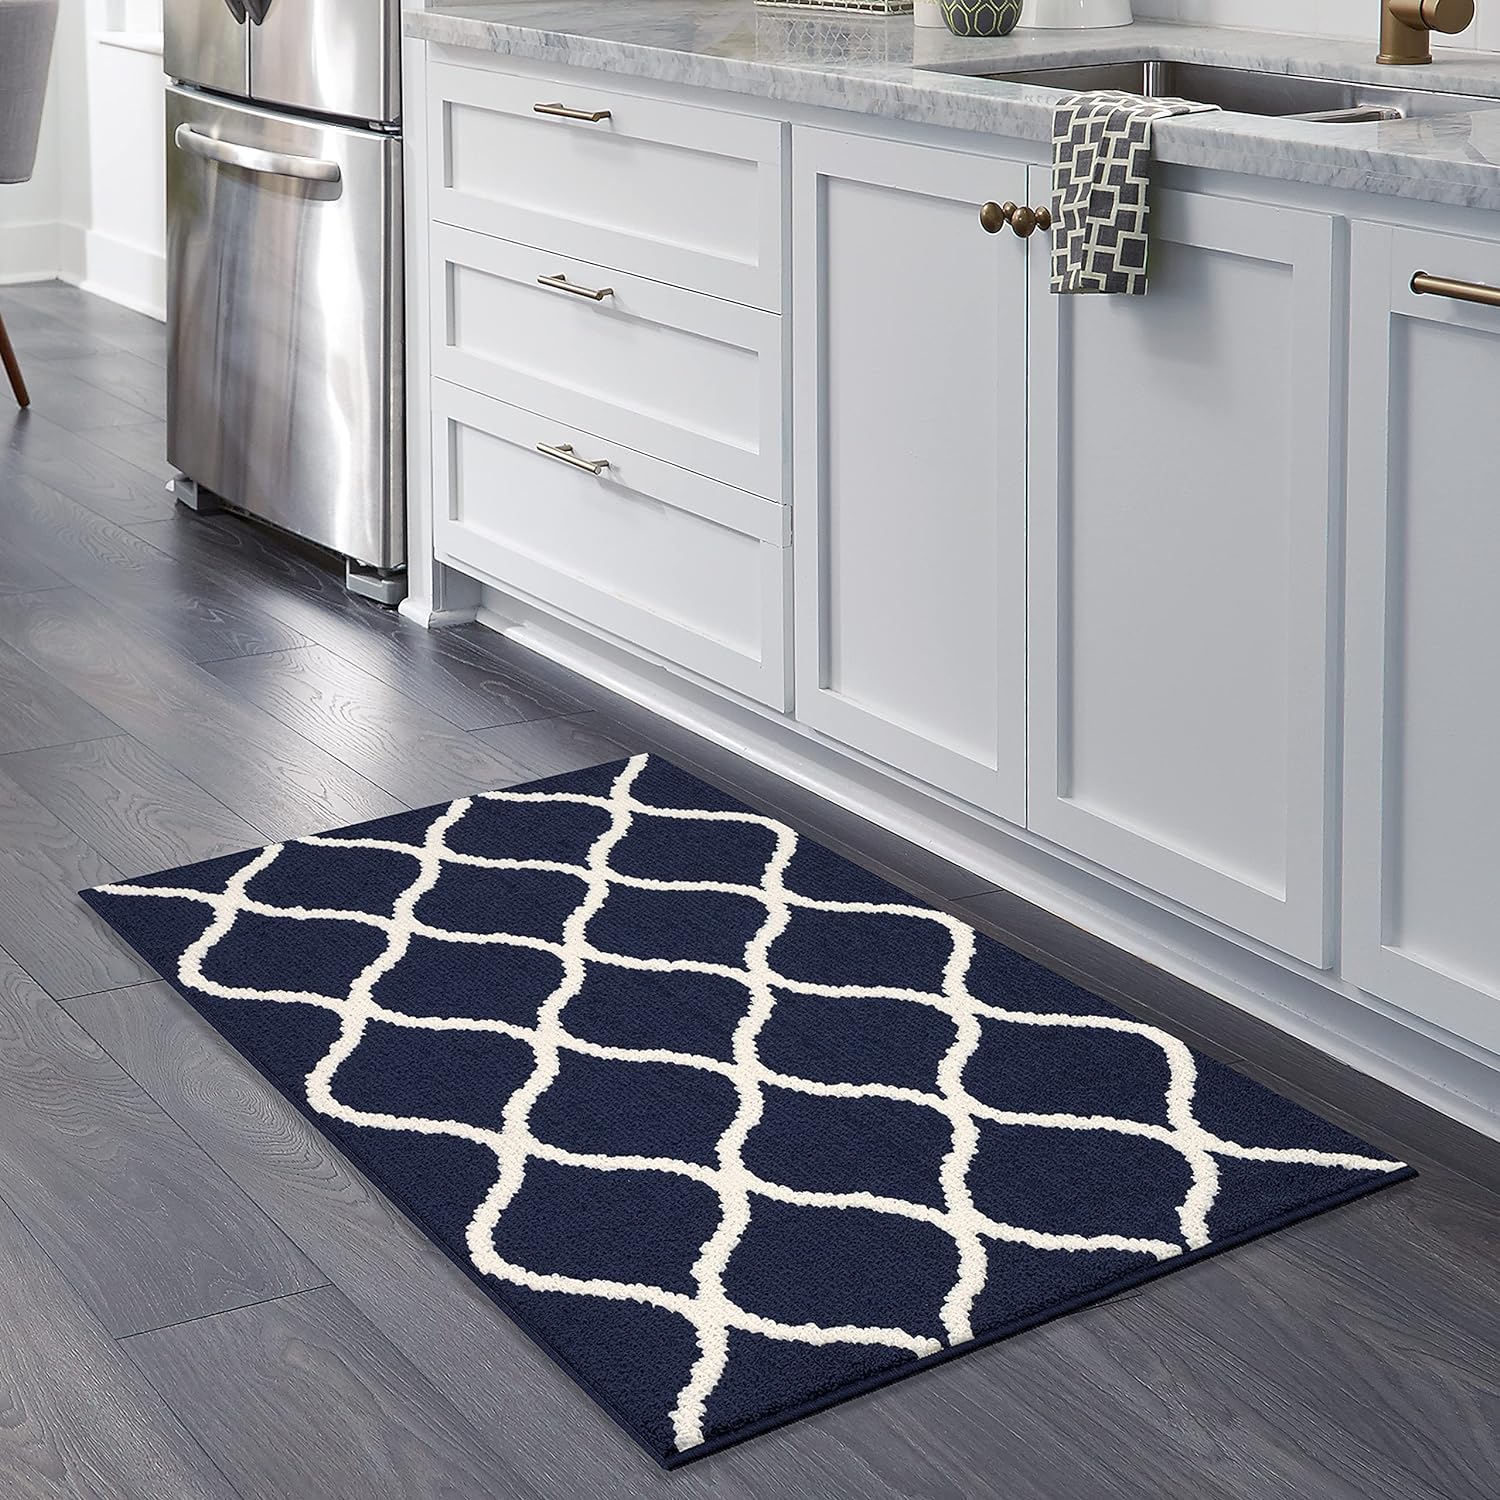 I hardly leave a review but this rug was better than expected! Even my daughter, who is picky, said it felt nice and soft when she stepped on it. It also matched the kitchen perfectly. This rug is well made, fits as stated, and appears to be durable. I was so impressed, I just ordered 2 of a different size to place in entryways! Love the design and the color choices available! You won't be disappointed and the cost for this size was great value! 5 stars